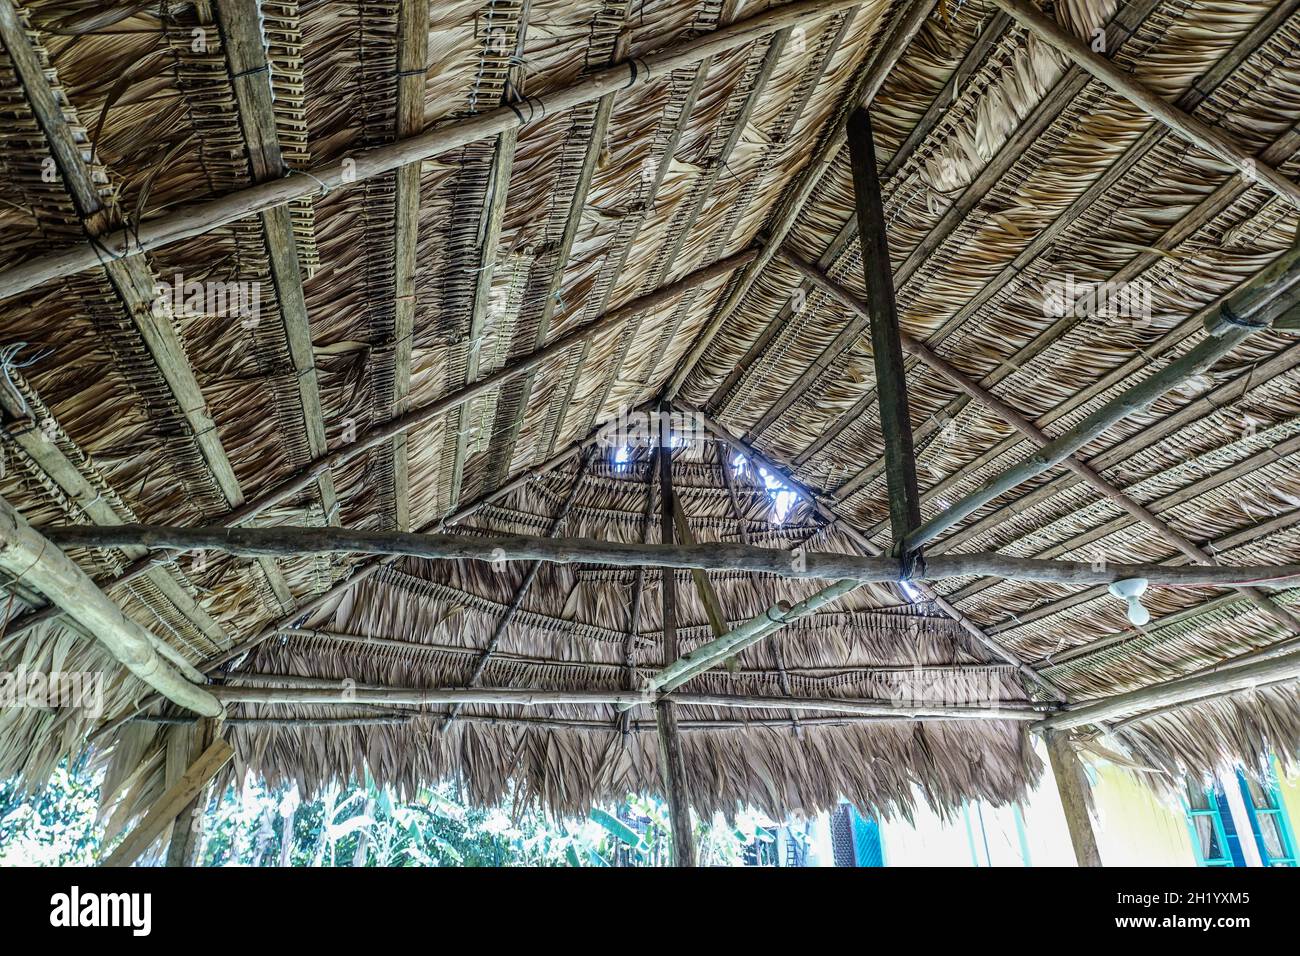 Thatched roof in Suretka, Costa Rica. Stock Photo